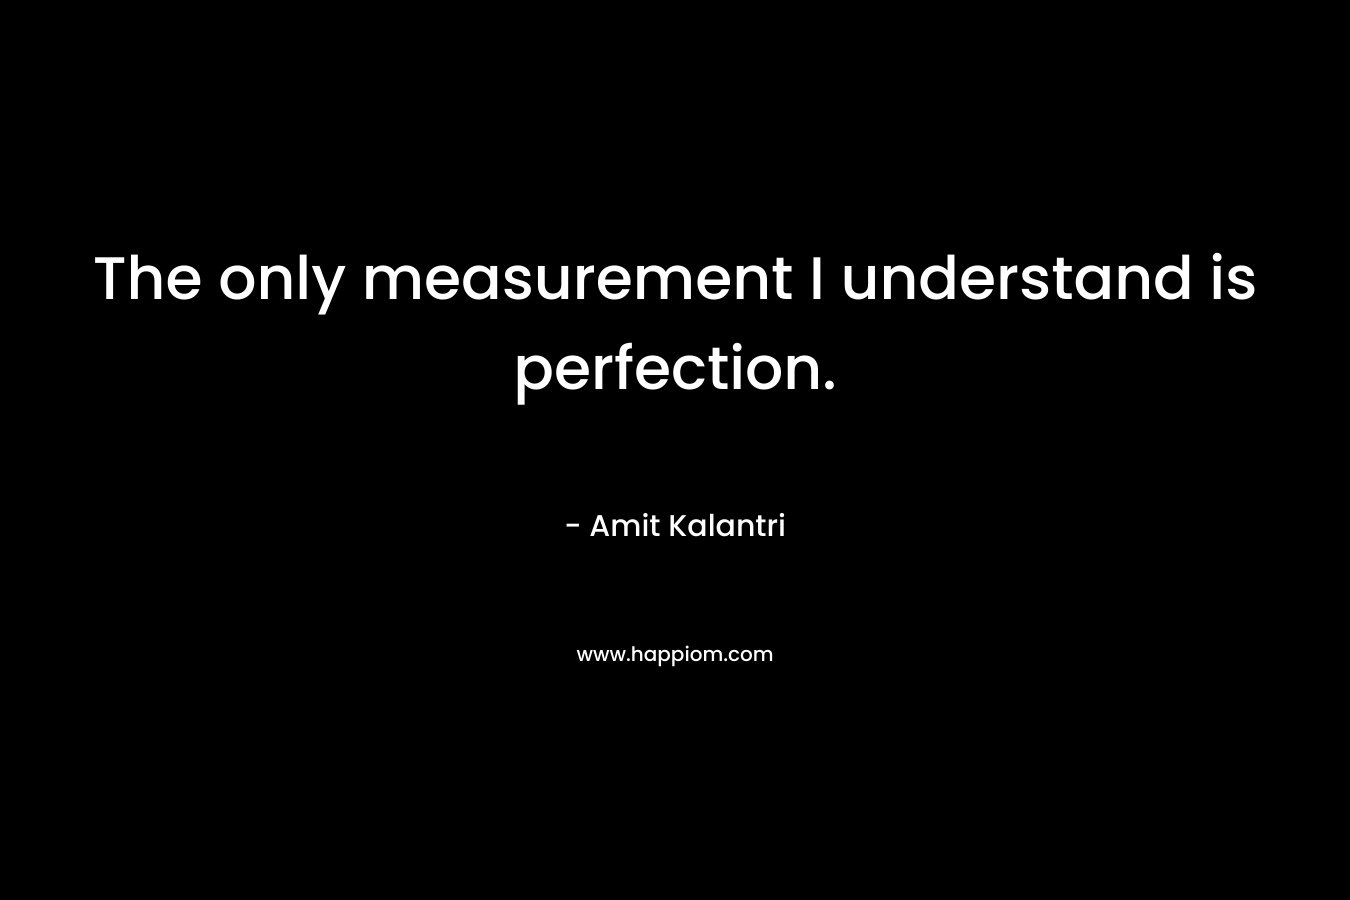 The only measurement I understand is perfection.